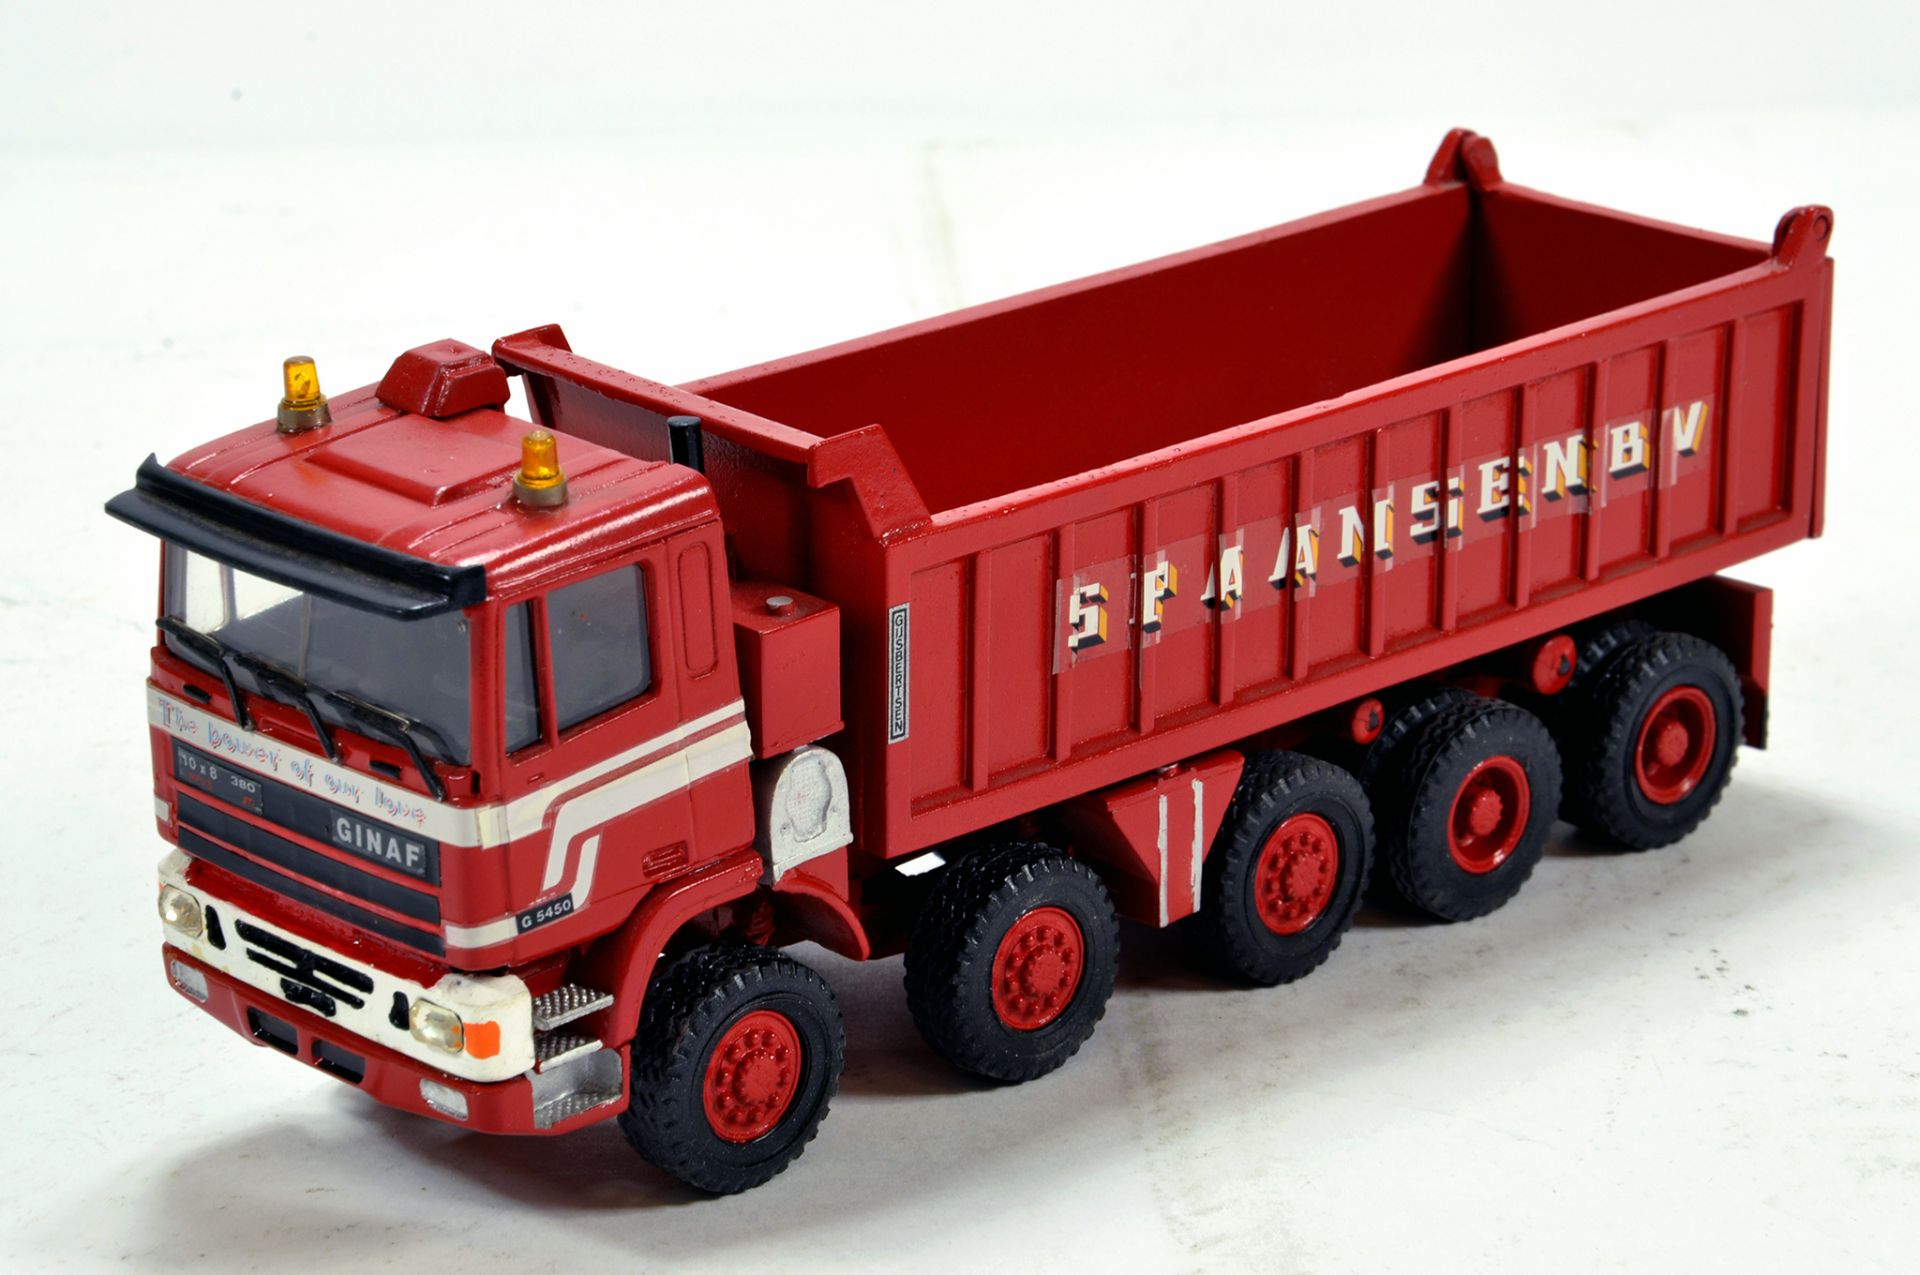 Zon Models 1/50 Truck Issue comprising White Metal GINAF 10x8 Off Road Dump Truck in livery of